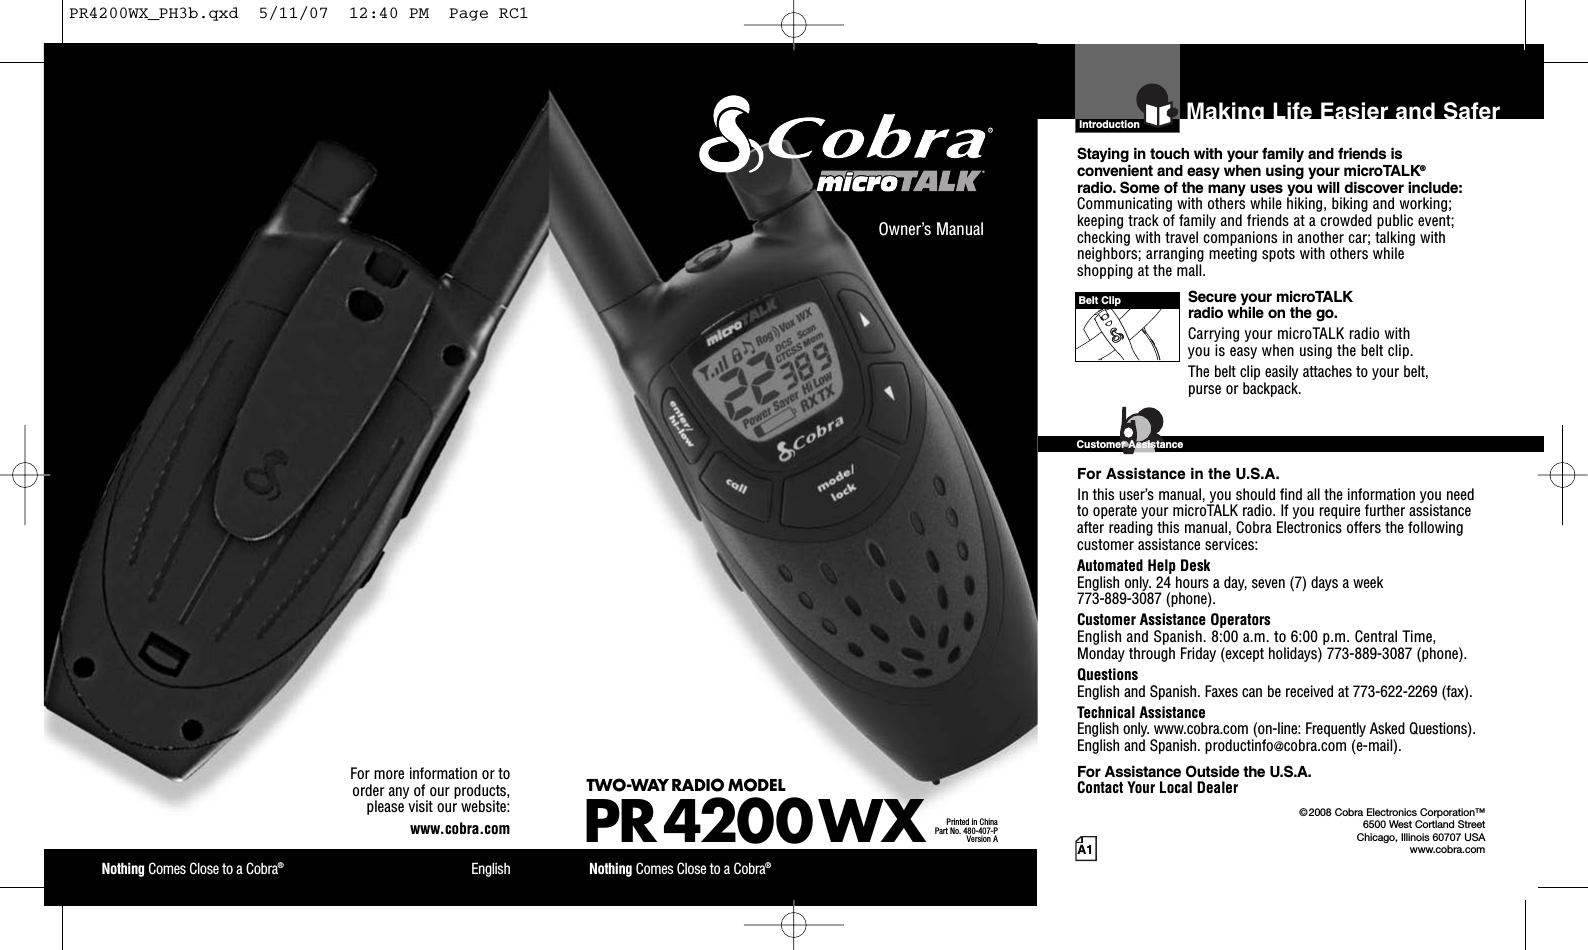 Nothing Comes Close to a Cobra®EnglishFor more information or to order any of our products, please visit our website:www.cobra.comA1Making Life Easier and SaferOwner’s ManualNothing Comes Close to a Cobra®TWO-WAY RADIO MODEL PR 4200 WXPrinted in ChinaPart No. 480-407-PVersion AIntro Operation CustomerAssistanceWarrantyNoticeMain IconsSecondary IconsIntroductionStaying in touch with your family and friends is convenient and easy when using your microTALK®radio. Some of the many uses you will discover include:Communicating with others while hiking, biking and working;keeping track of family and friends at a crowded public event;checking with travel companions in another car; talking withneighbors; arranging meeting spots with others while shopping at the mall.Secure your microTALK radio while on the go.Carrying your microTALK radio with you is easy when using the belt clip. The belt clip easily attaches to your belt, purse or backpack. For Assistance in the U.S.A.In this user’s manual, you should find all the information you needto operate your microTALK radio. If you require further assistanceafter reading this manual, Cobra Electronics offers the followingcustomer assistance services:Automated Help Desk English only. 24 hours a day, seven (7) days a week 773-889-3087 (phone). Customer Assistance OperatorsEnglish and Spanish. 8:00 a.m. to 6:00 p.m. Central Time,Monday through Friday (except holidays) 773-889-3087 (phone). QuestionsEnglish and Spanish. Faxes can be received at 773-622-2269 (fax). Technical AssistanceEnglish only. www.cobra.com (on-line: Frequently Asked Questions). English and Spanish. productinfo@cobra.com (e-mail).For Assistance Outside the U.S.A.Contact Your Local DealerBelt ClipIntro Operation CustomerAssistanceWarrantyNoticeMain IconsSecondary IconsCustomer Assistance©2008 Cobra Electronics Corporation™6500 West Cortland StreetChicago, Illinois 60707 USAwww.cobra.comPR4200WX_PH3b.qxd  5/11/07  12:40 PM  Page RC1